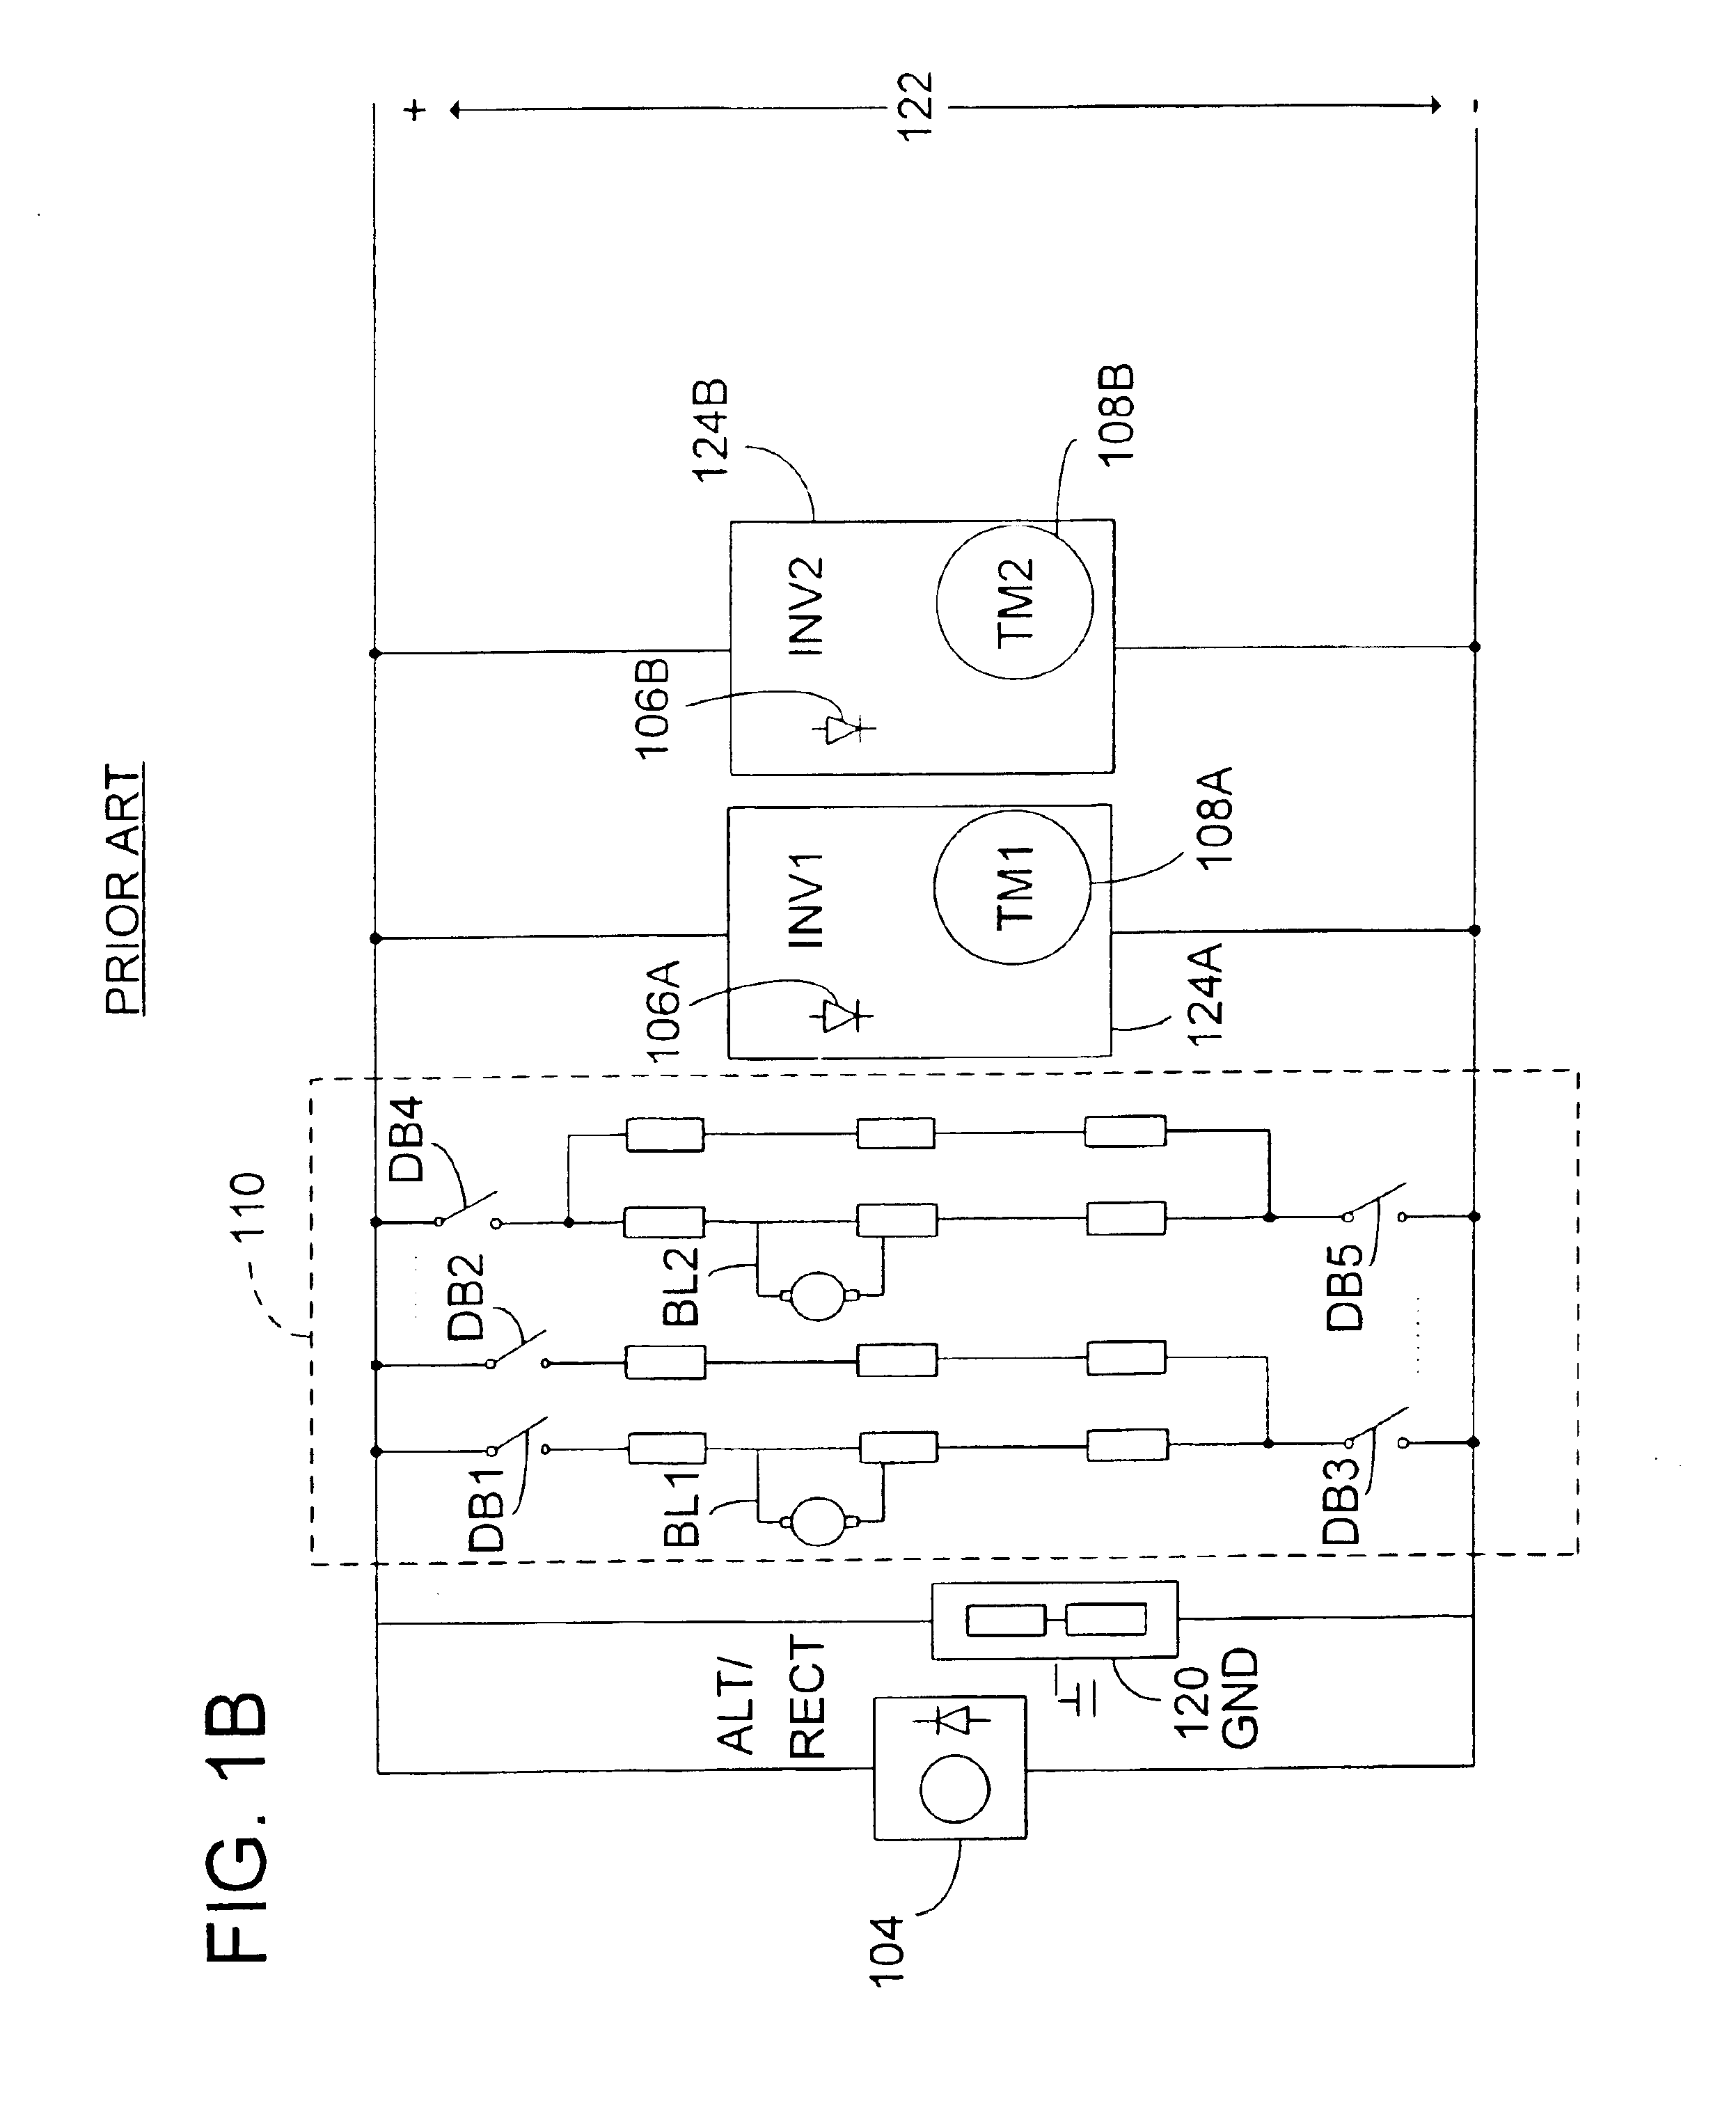 Hybrid energy off highway vehicle electric power storage system and method